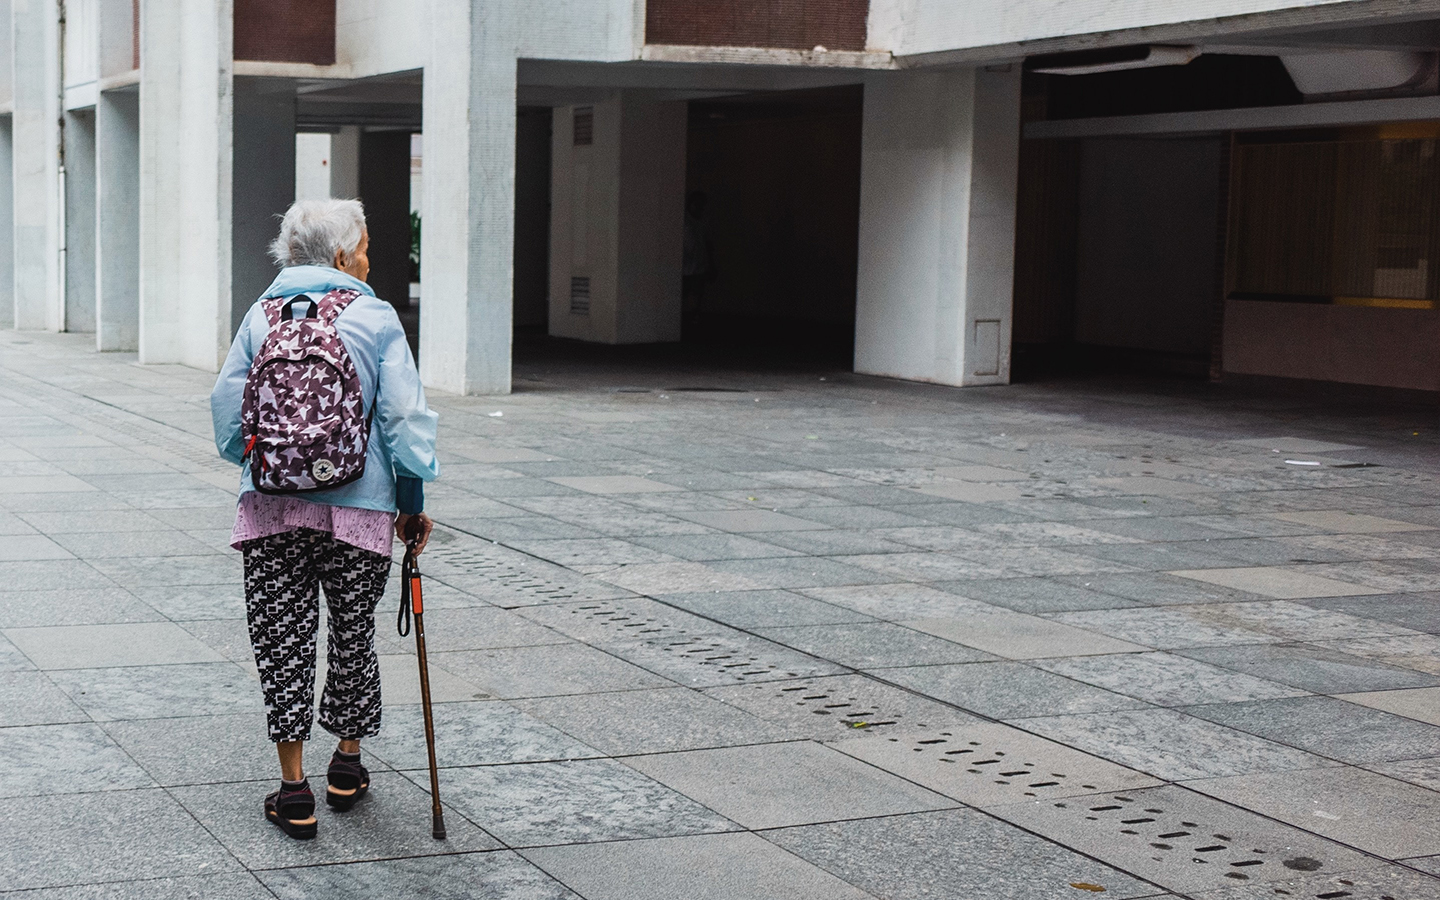 Macao’s elderly are struggling in the cold weather